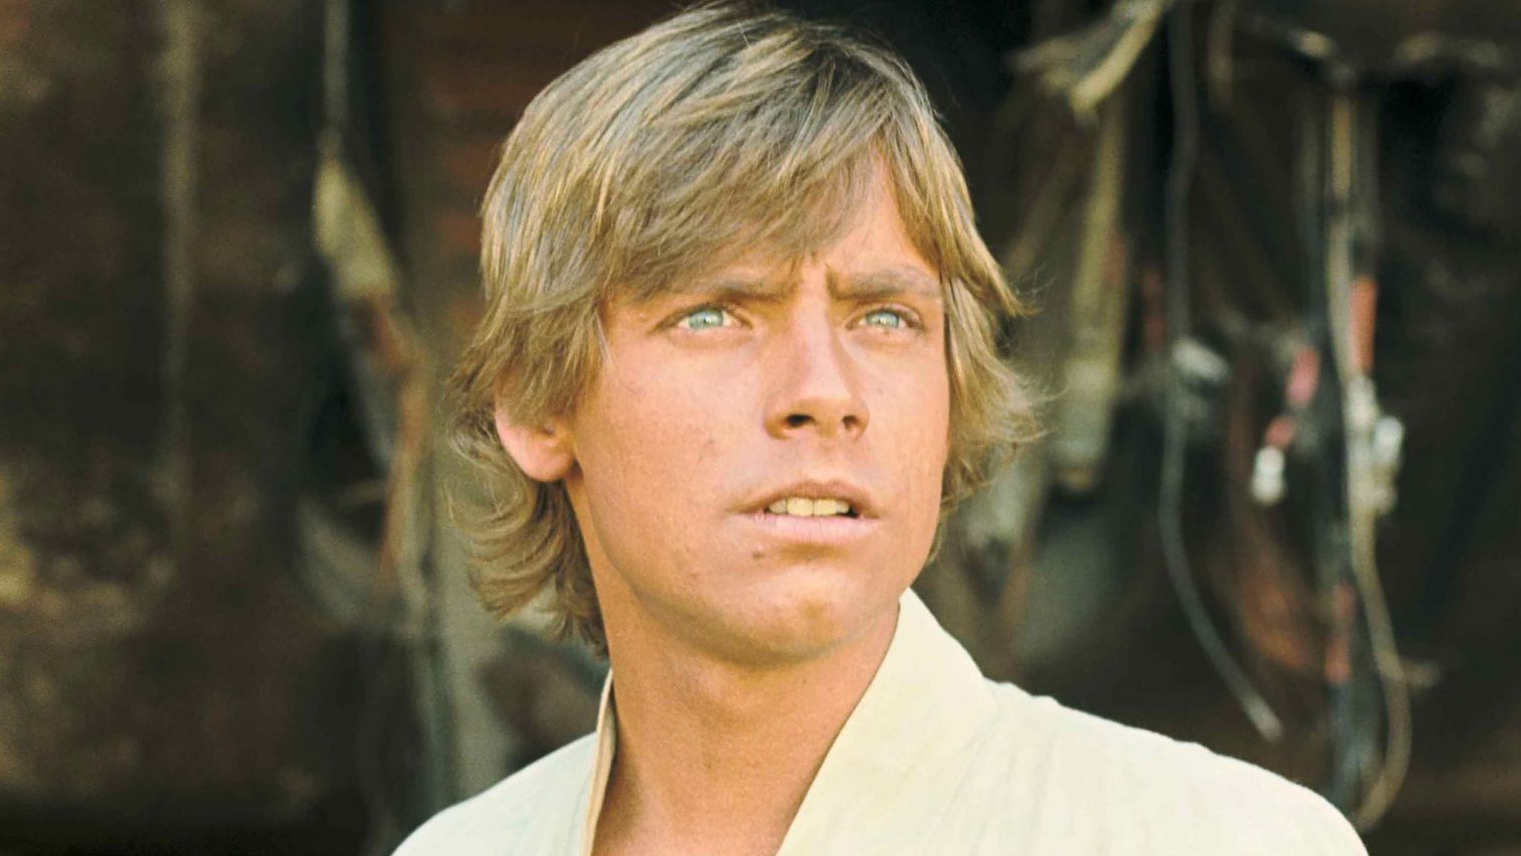 What does Mark Hamill as Luke Skywalker look so different in the